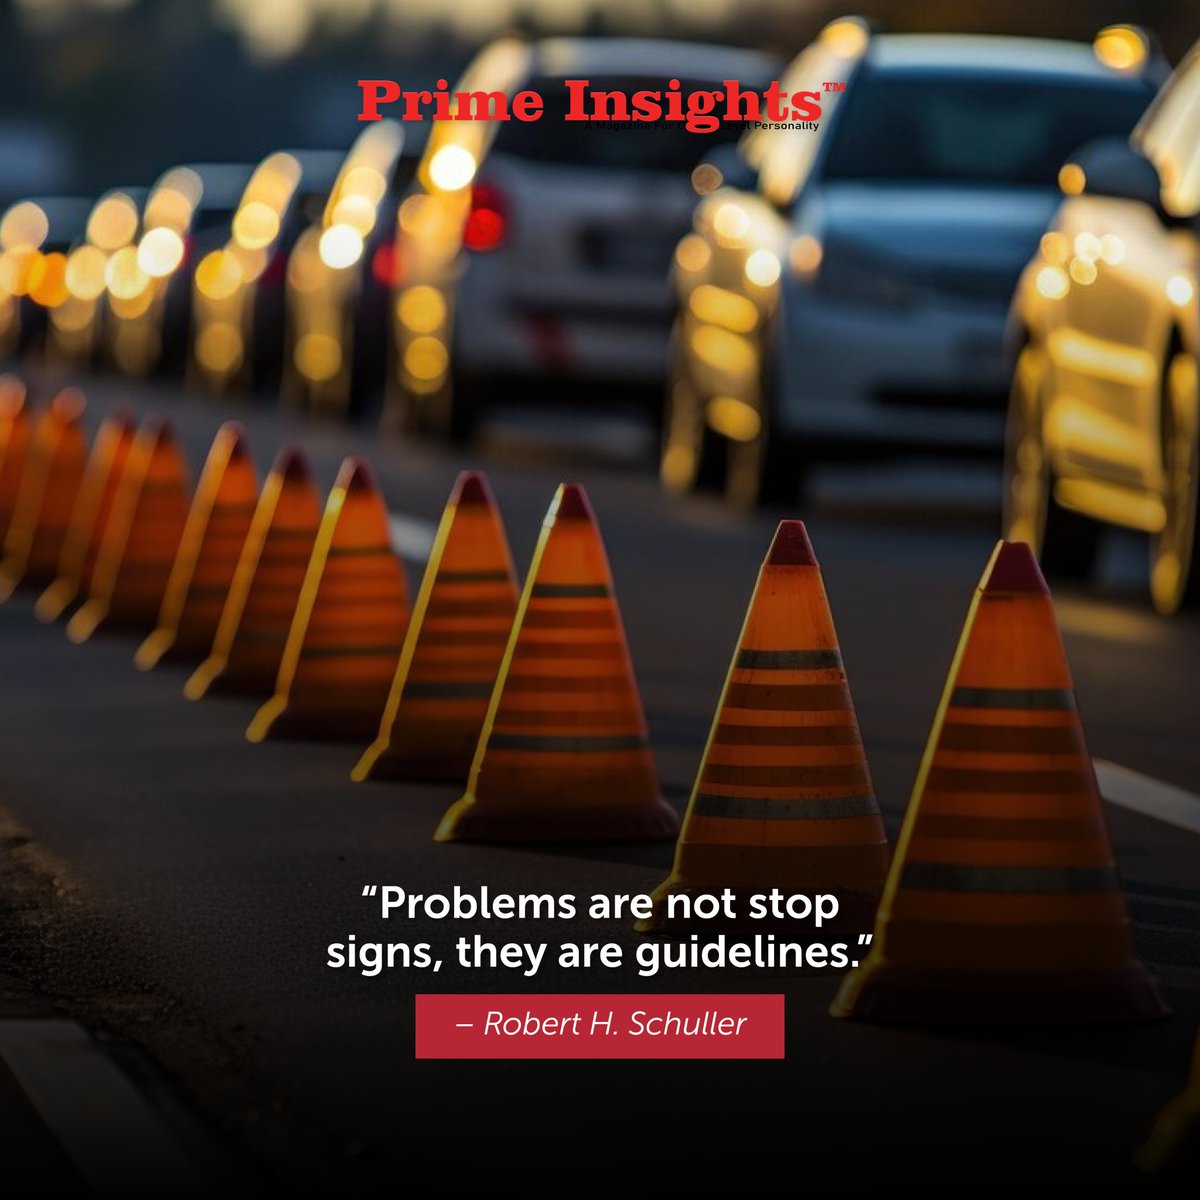 “Problems are not stop signs, they are guidelines.”
– Robert H. Schuller

primeinsights.in

#success #quoteoftheday #quoteoftheweek #successquotes #successgoals #quotesforsuccess #inspirationalquotes #motivationalquotes #inspiringthoughts